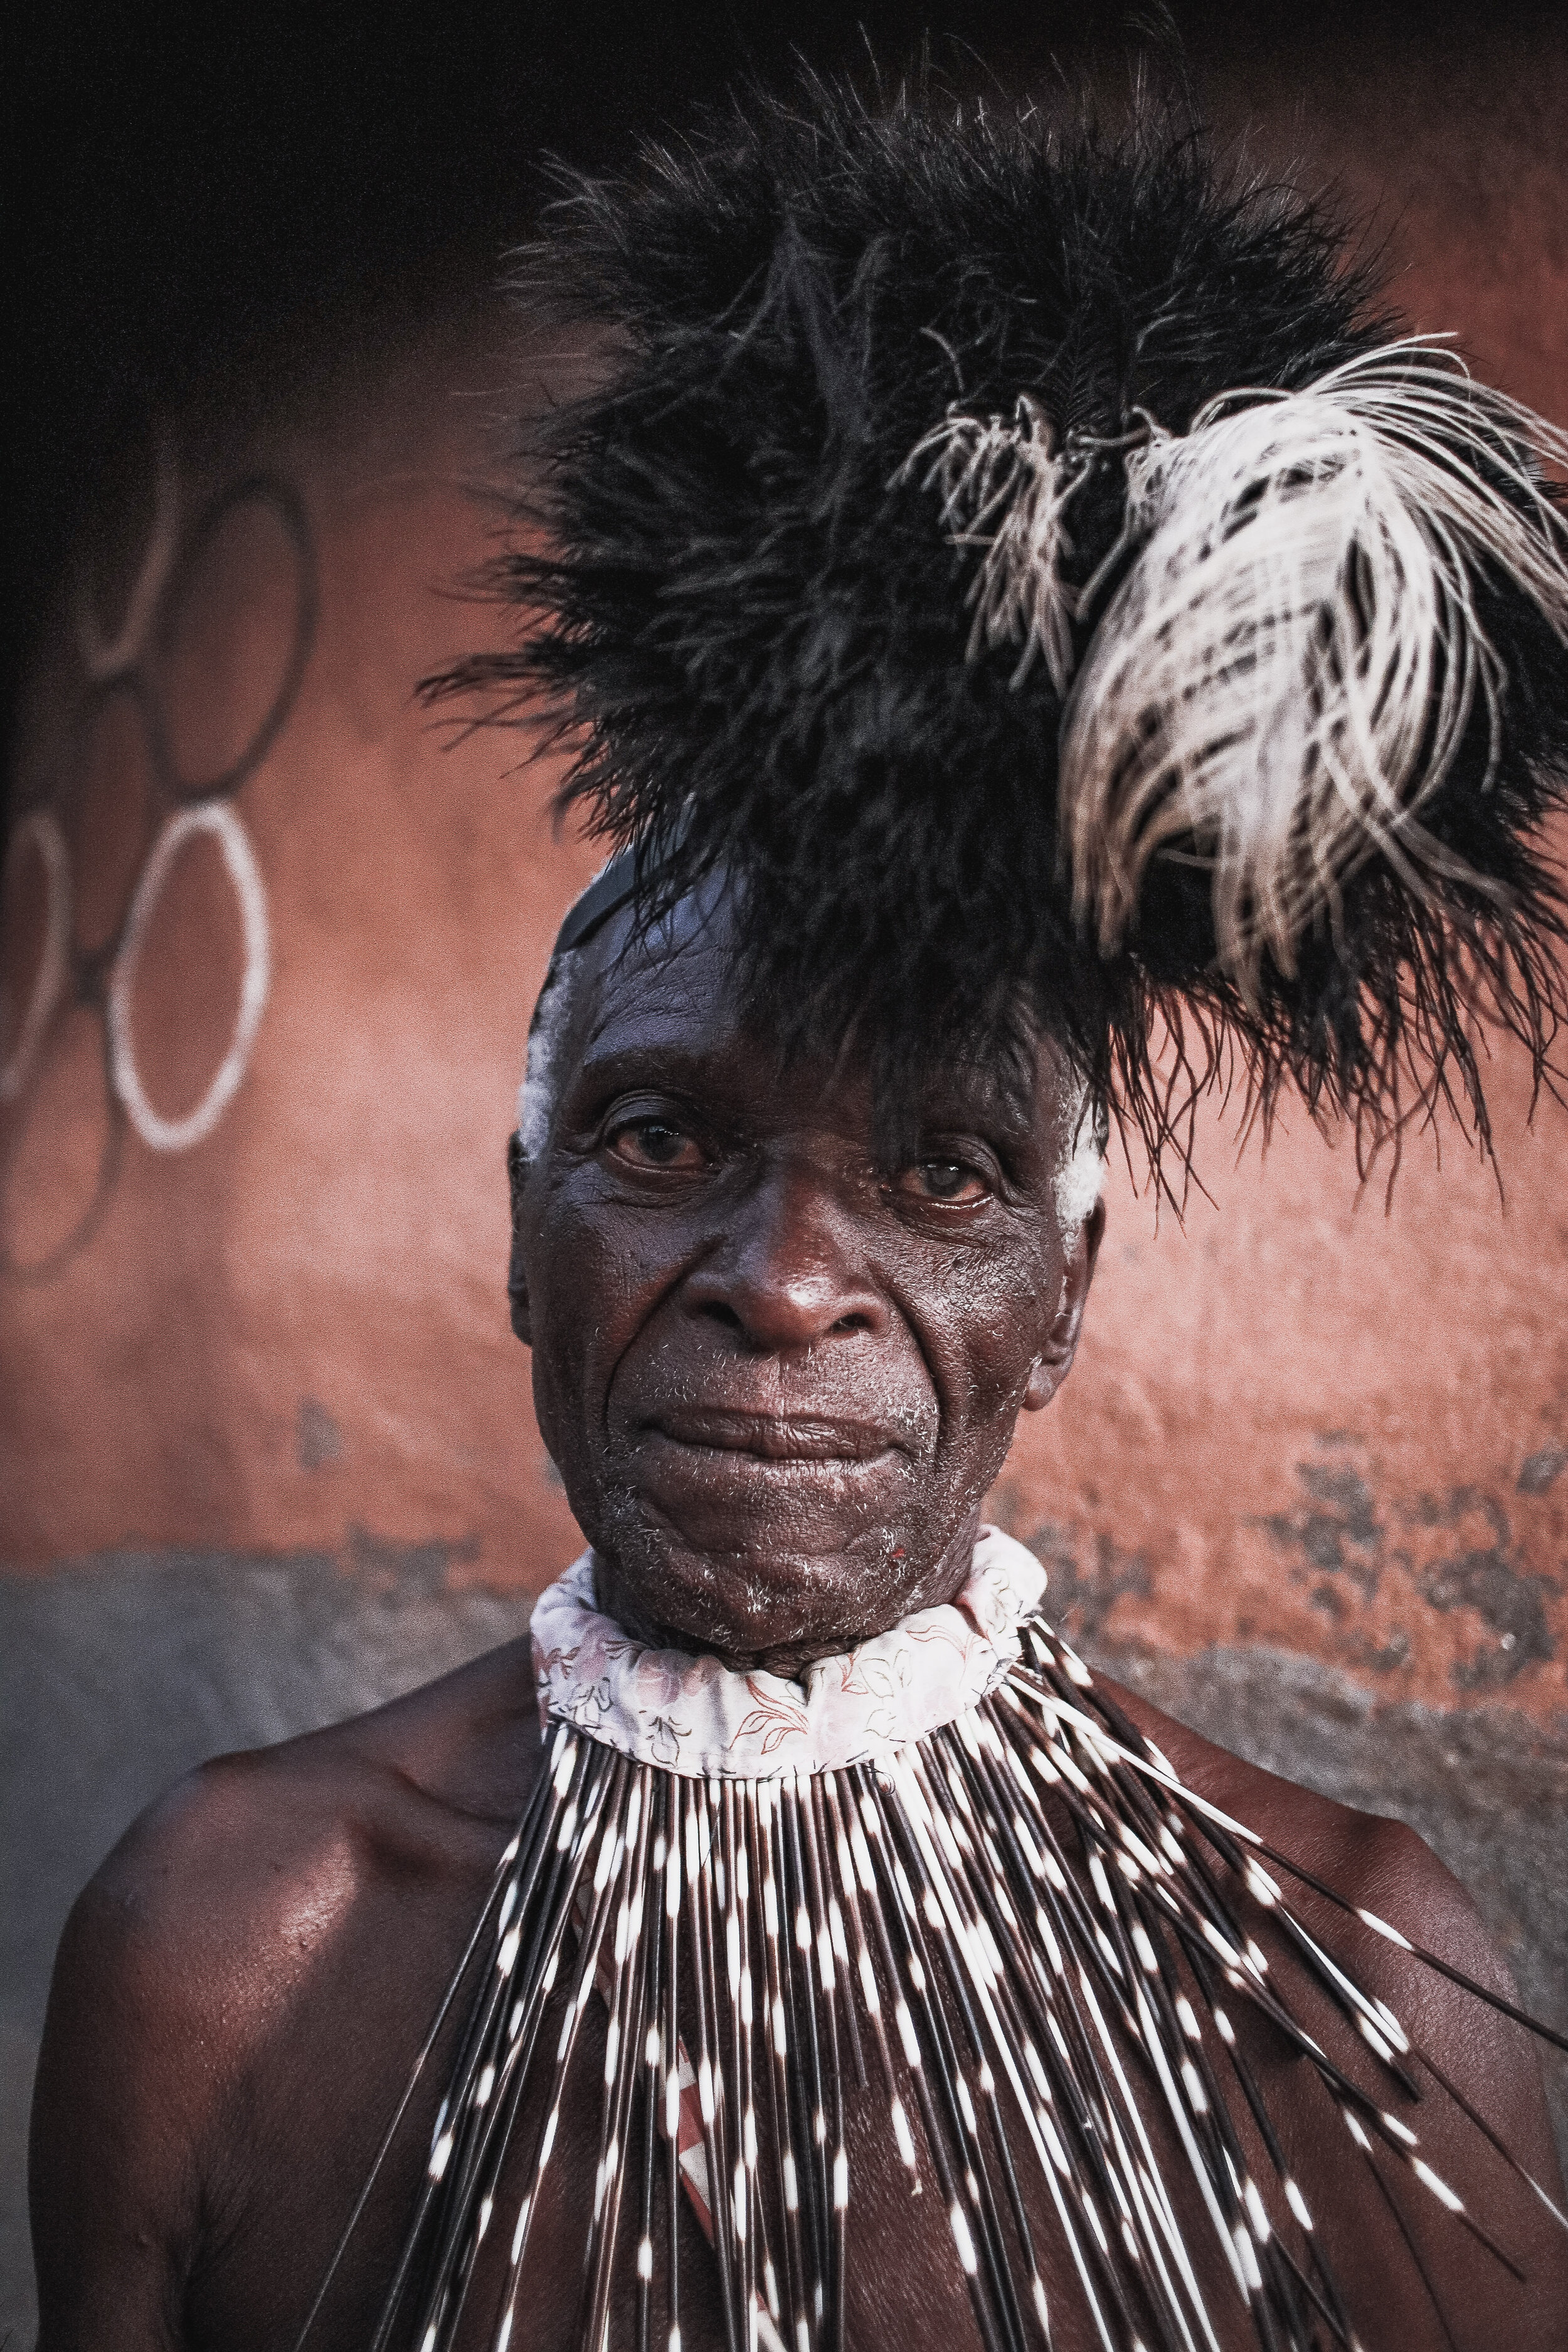 The Wisest (Co-Chief of  village in Zimbabwe)